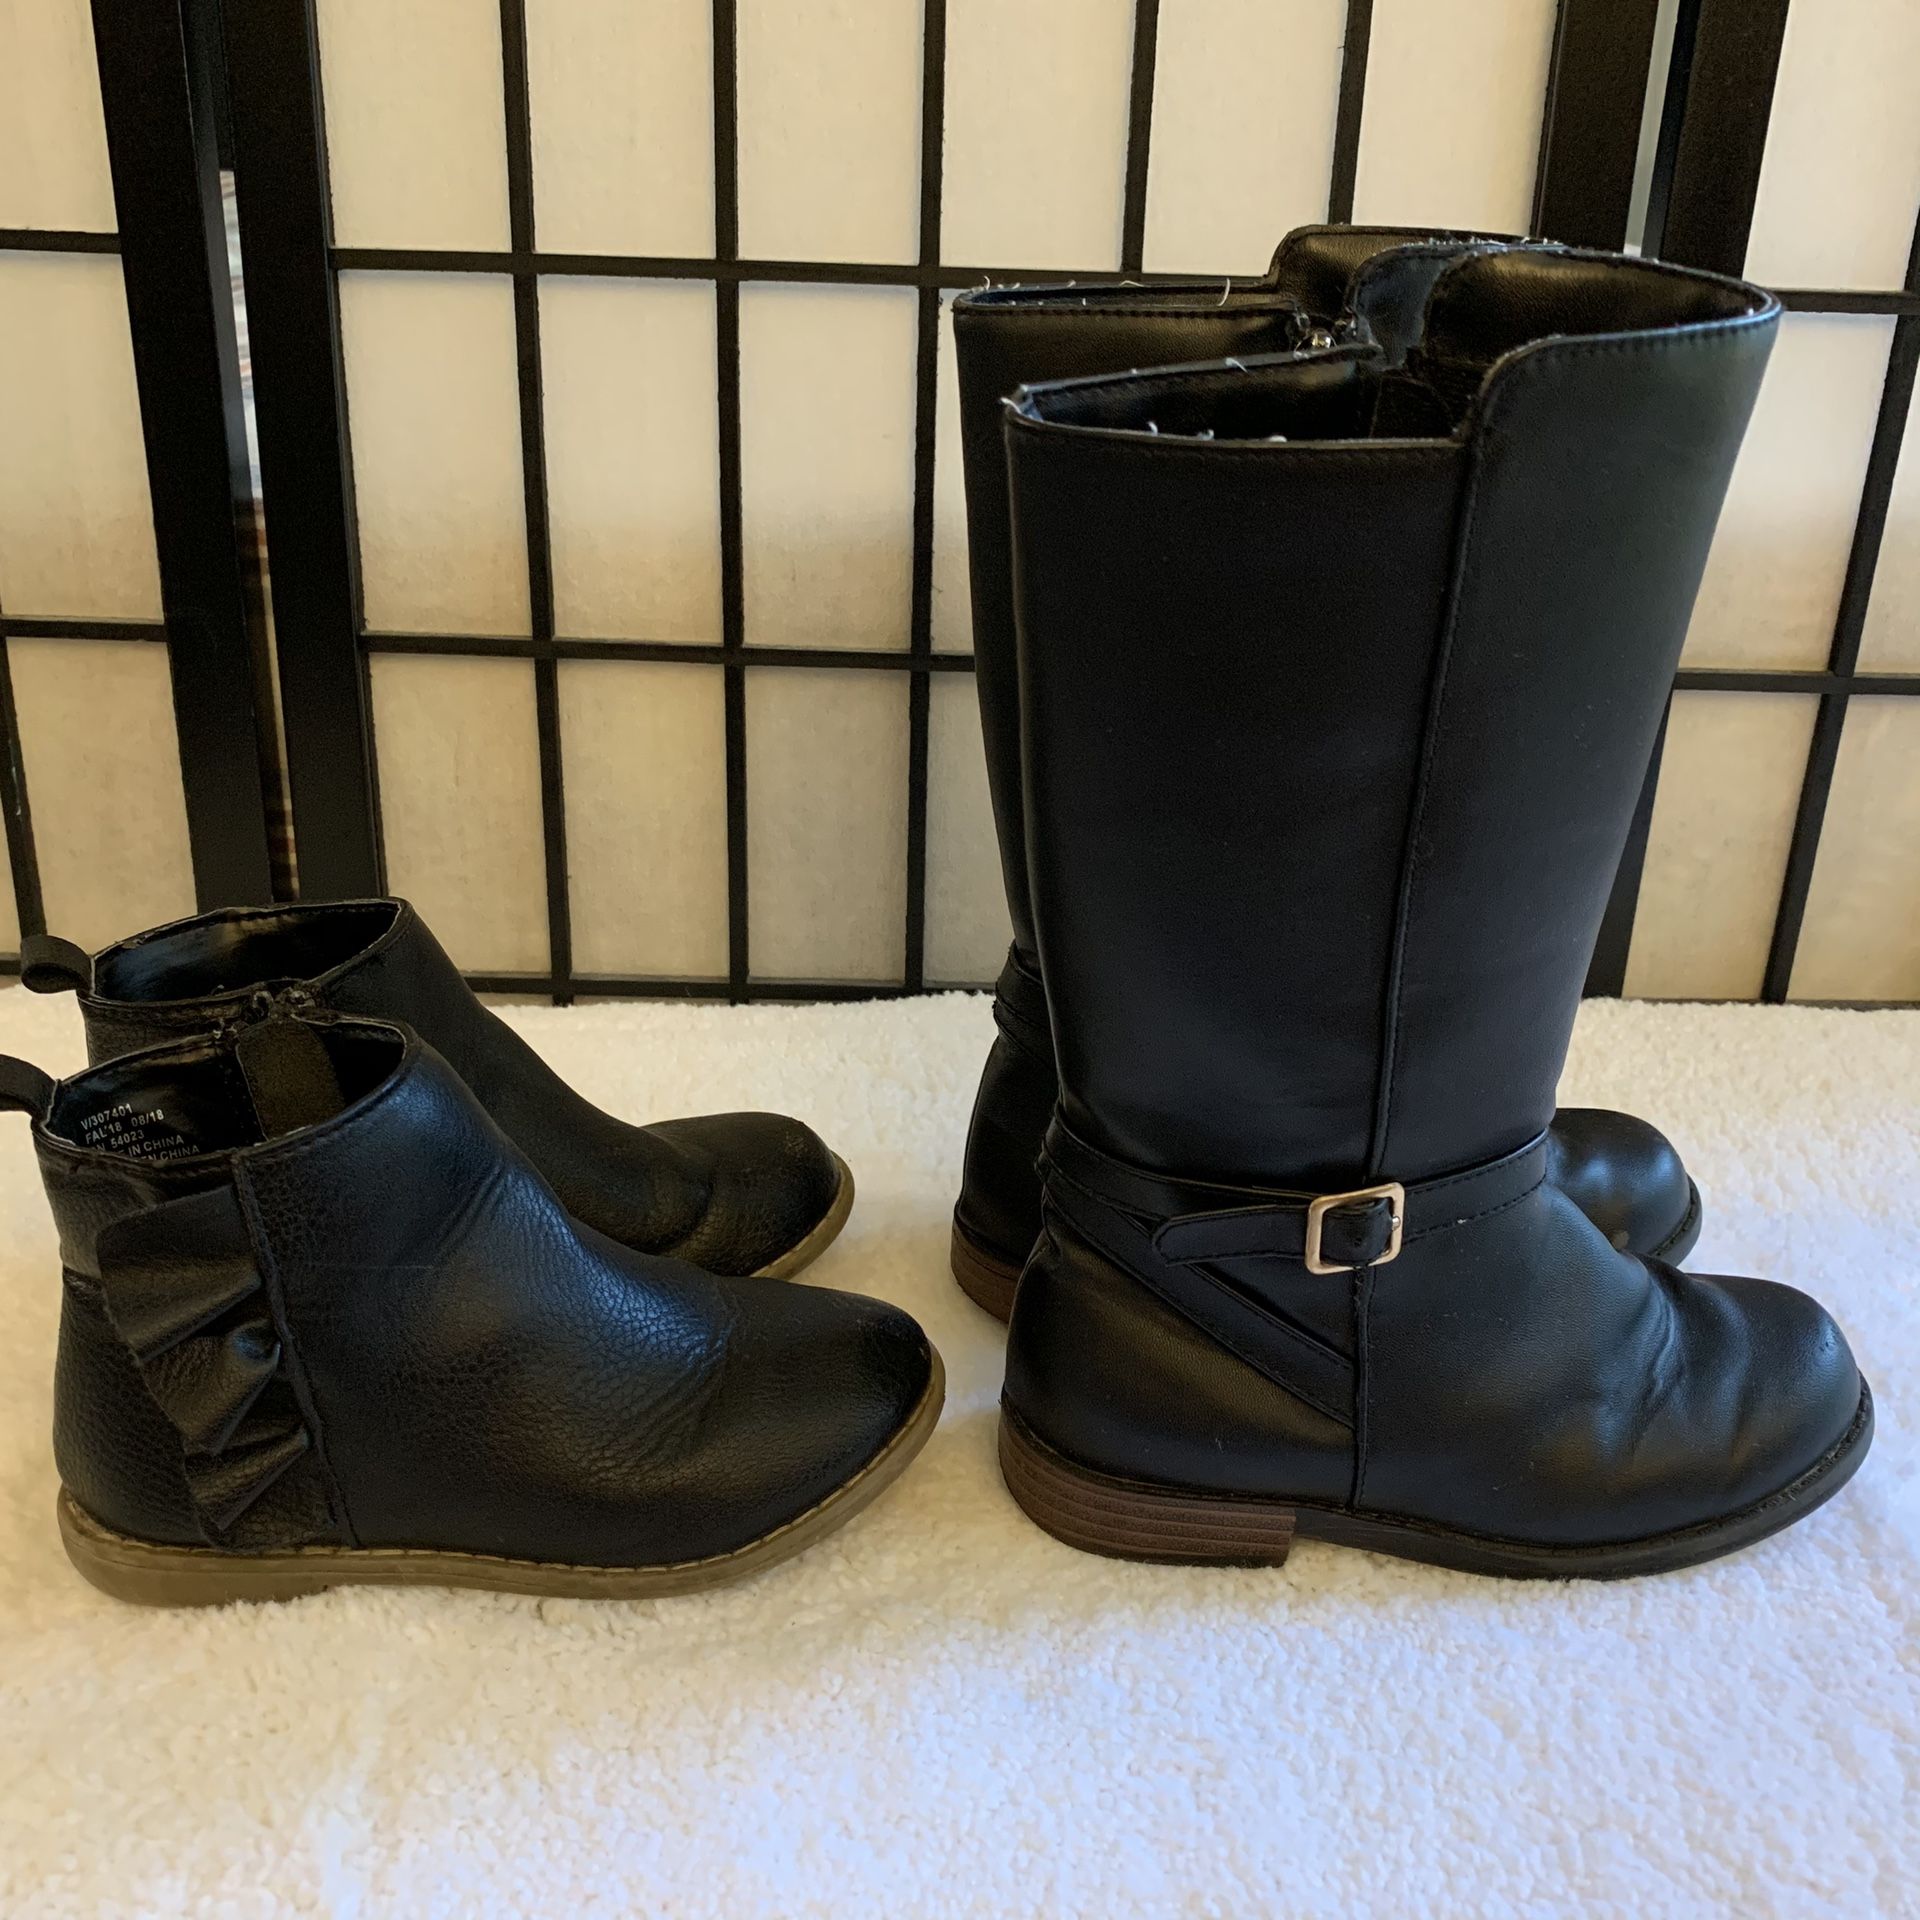 GAP girl ruffle short boots size 11 and Gymboree Riding boots 12